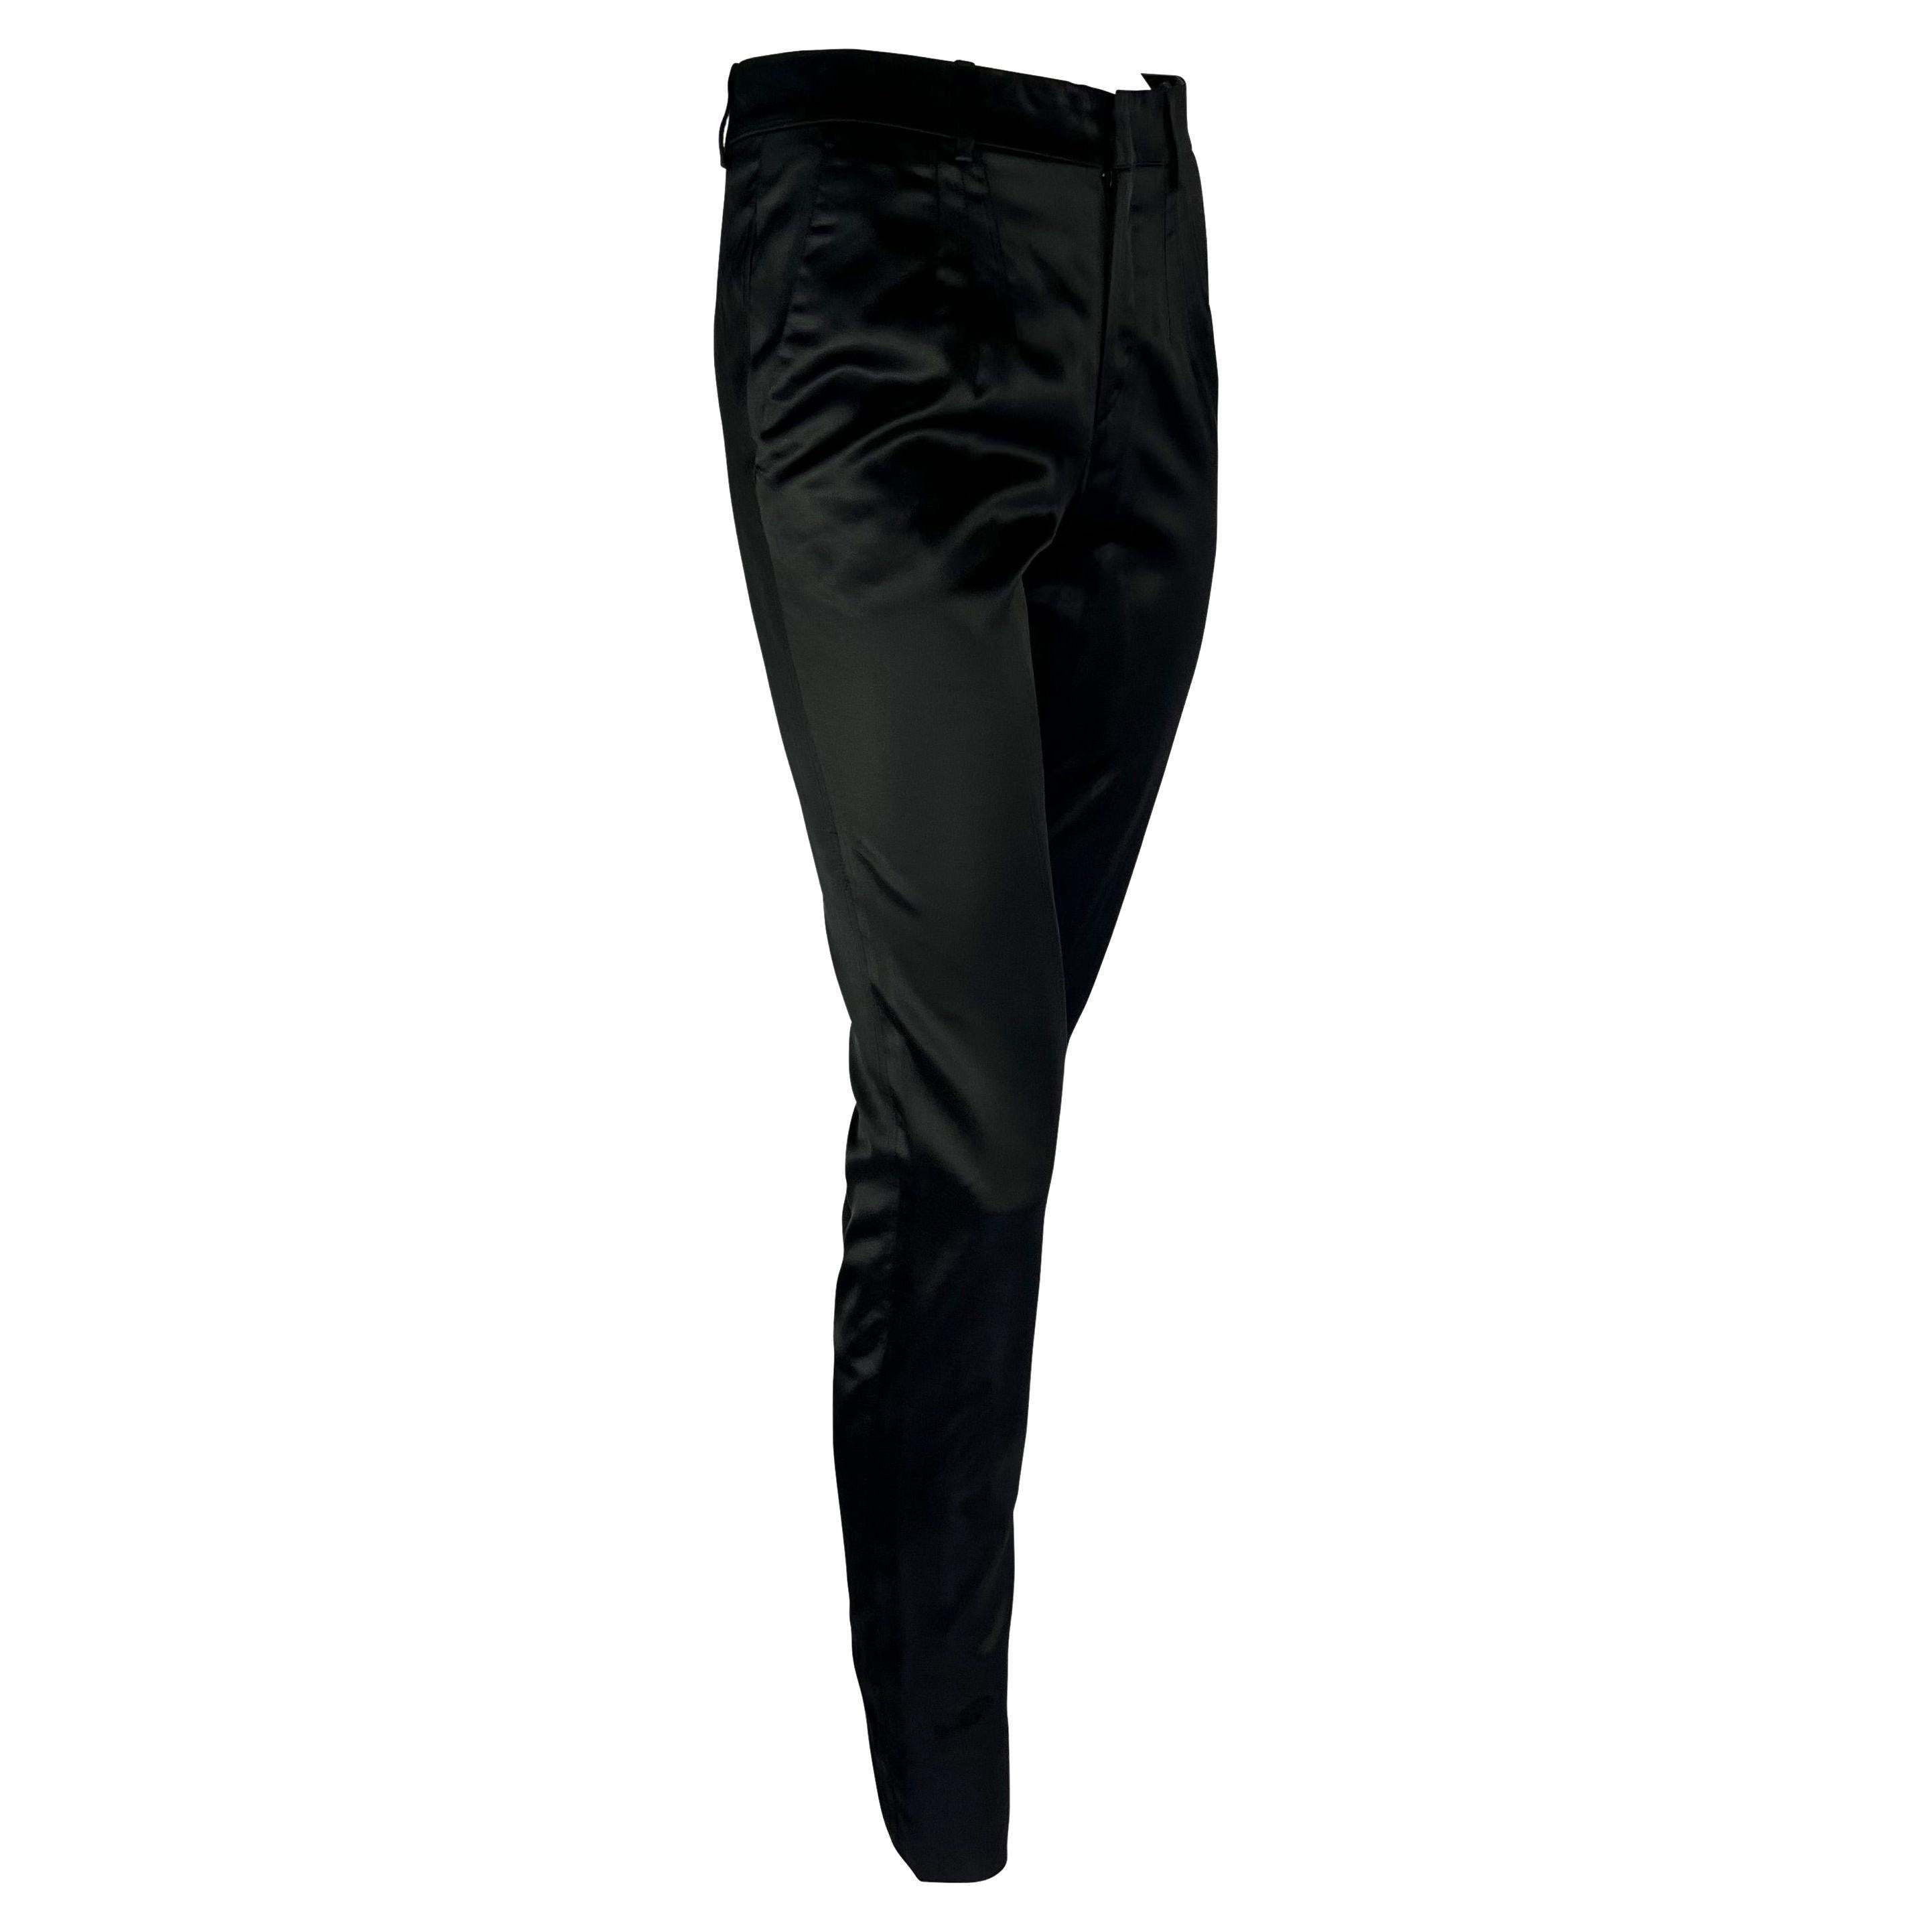 S/S 2001 Gucci by Tom Ford Black Satin Tapered Pants For Sale 7